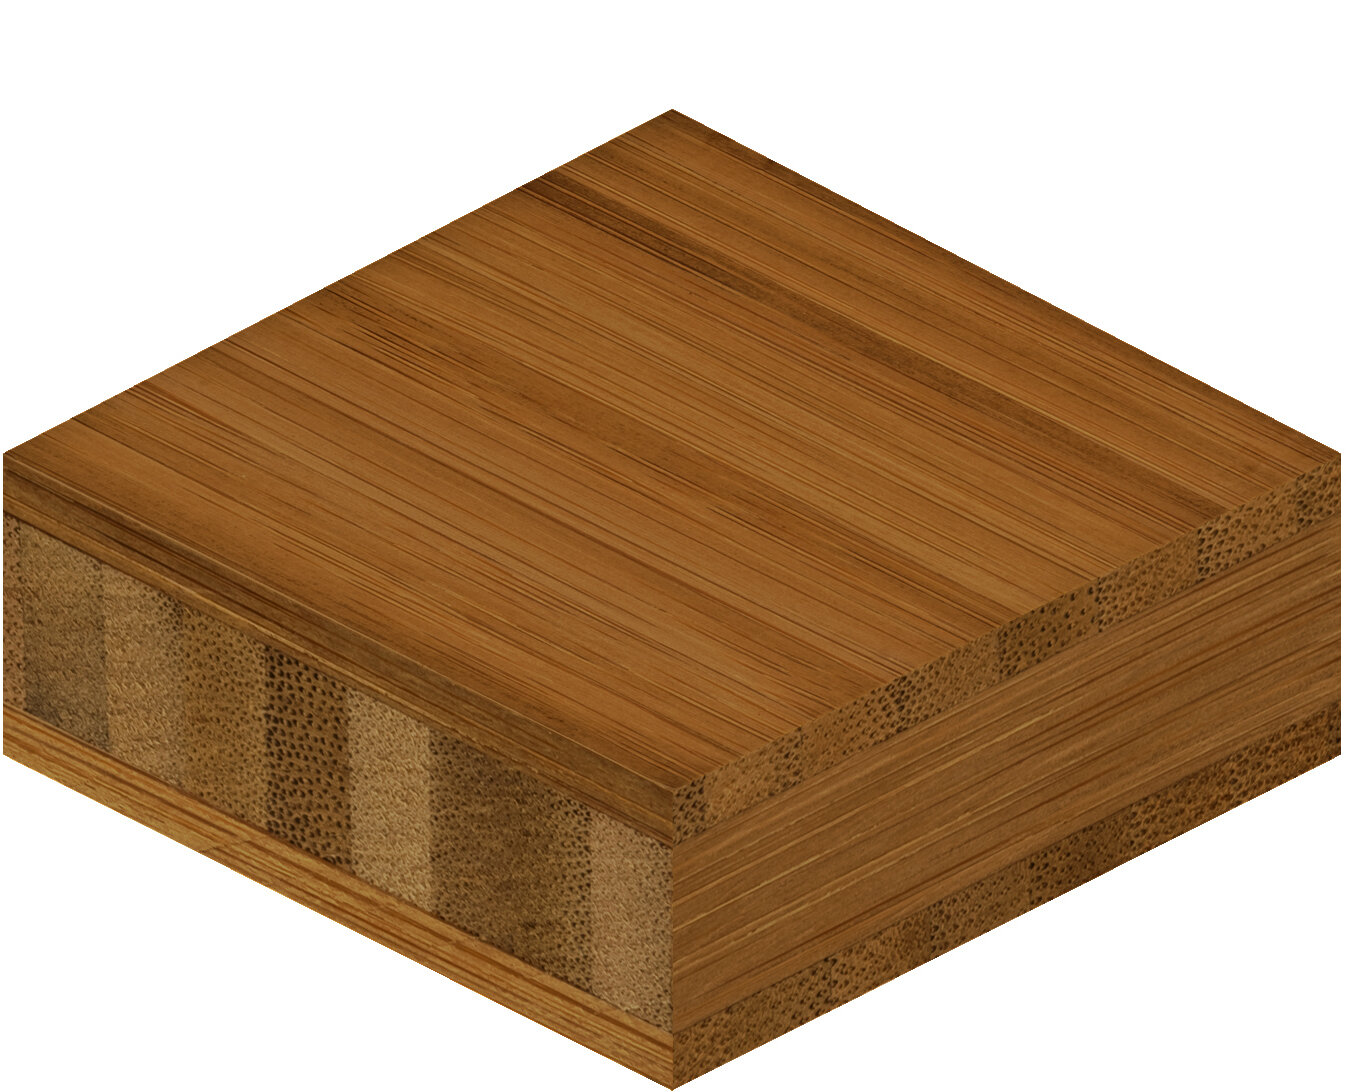 Bamboo Plywood for Sale  Ambient Building Products®